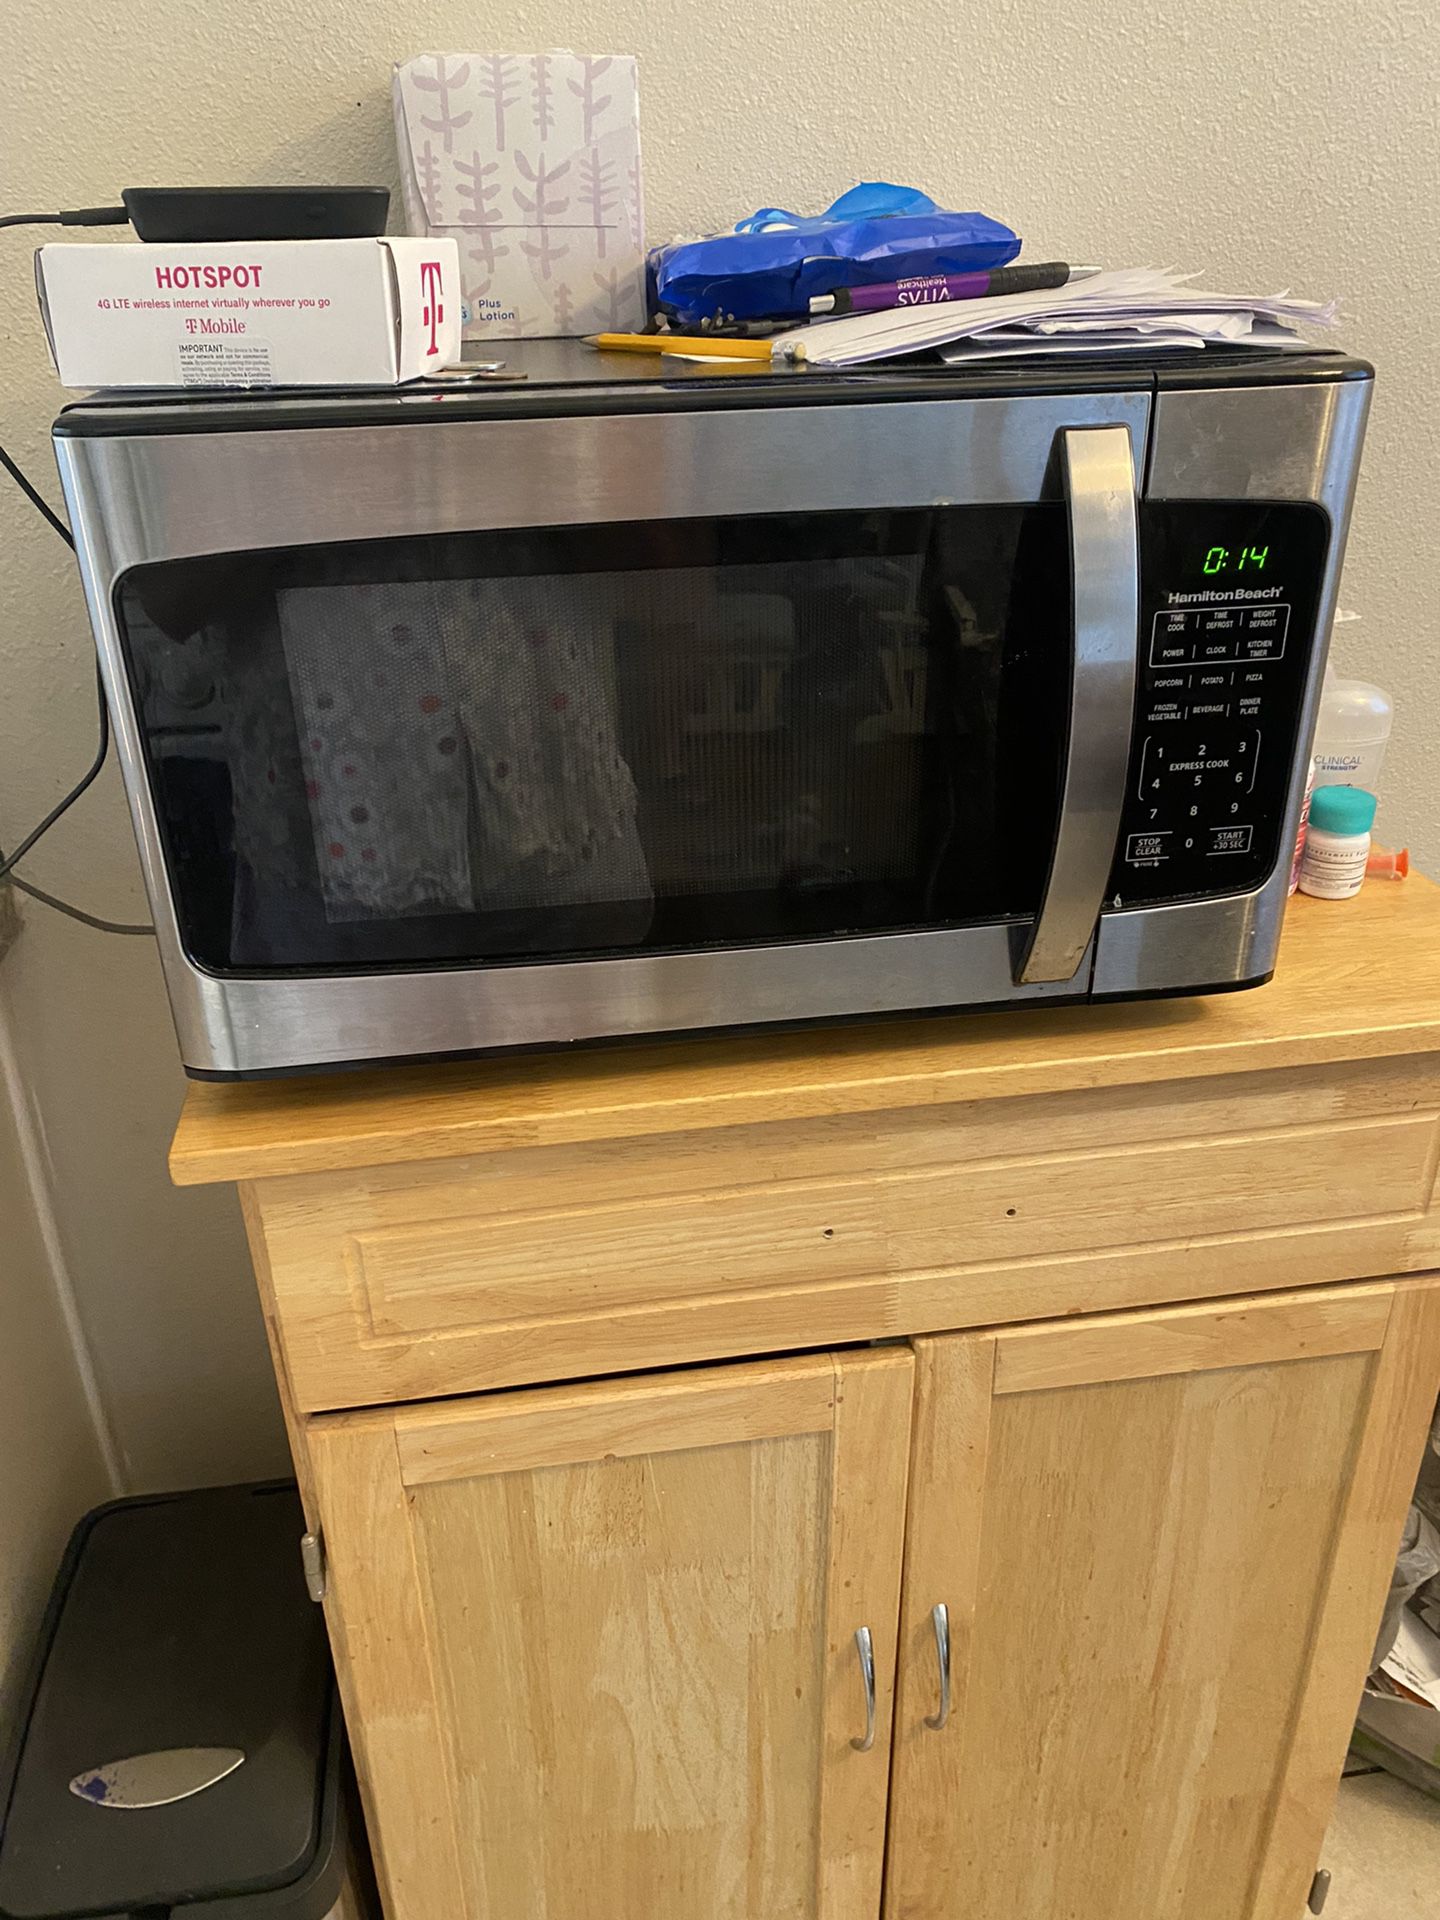 Microwave Hamilton Beach for Sale in Downey, CA - OfferUp